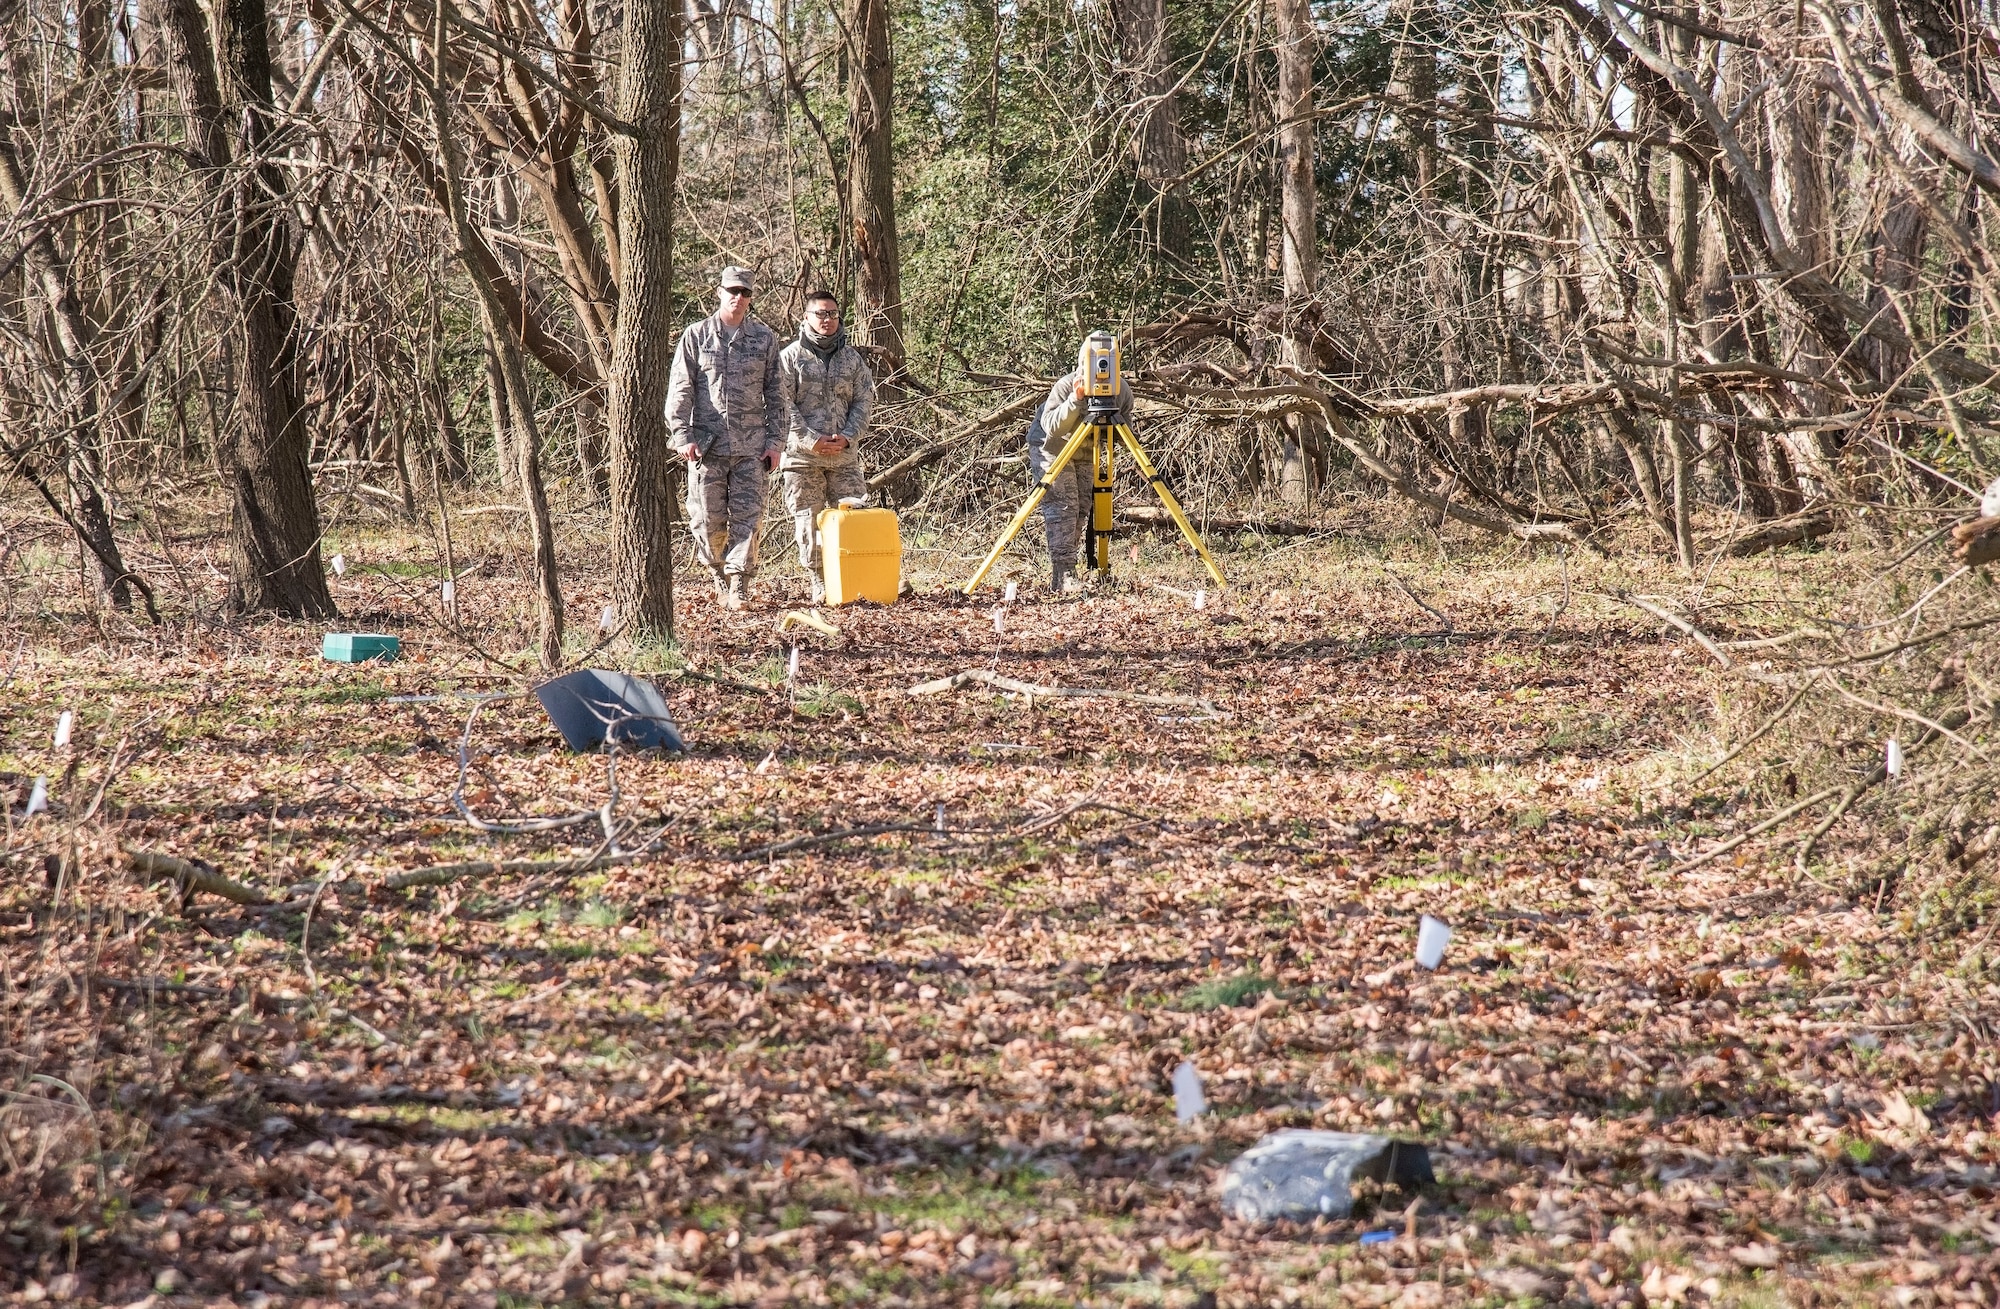 From left to right, Master Sgt. Jason McNabb, Senior Airman Edcyril Ernest Mallonga, and Airman 1st Class Alishia Lott, all from the 436th Civil Engineer Squadron engineering flight, look at a simulated debris field during an aircraft mishap survey exercise Dec. 18, 2018, near Killens Pond State Park, Kent County, Del. McNabb observed and instructed survey team members on procedures and methods used to document debris from an aircraft mishap. (U.S. Air Force photo by Roland Balik)